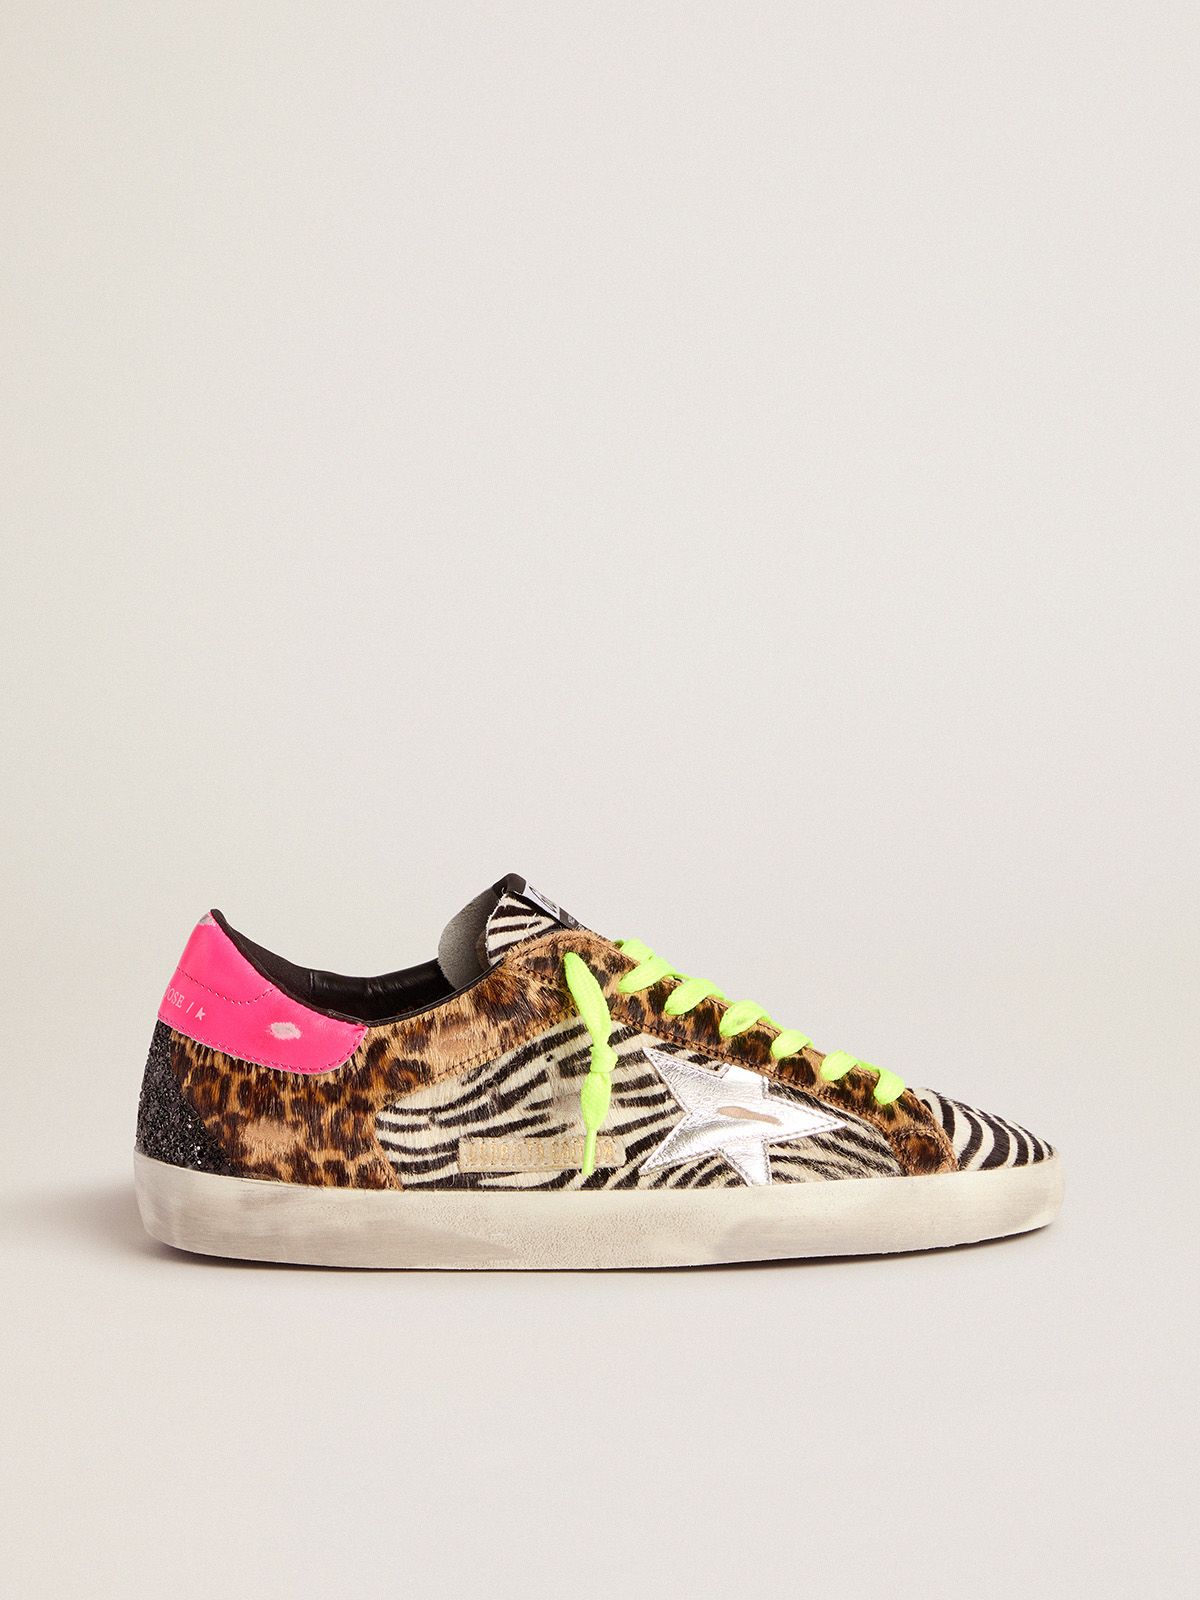 golden goose animal-print glitter Women's Super-Star Limited Edition LAB sneakers